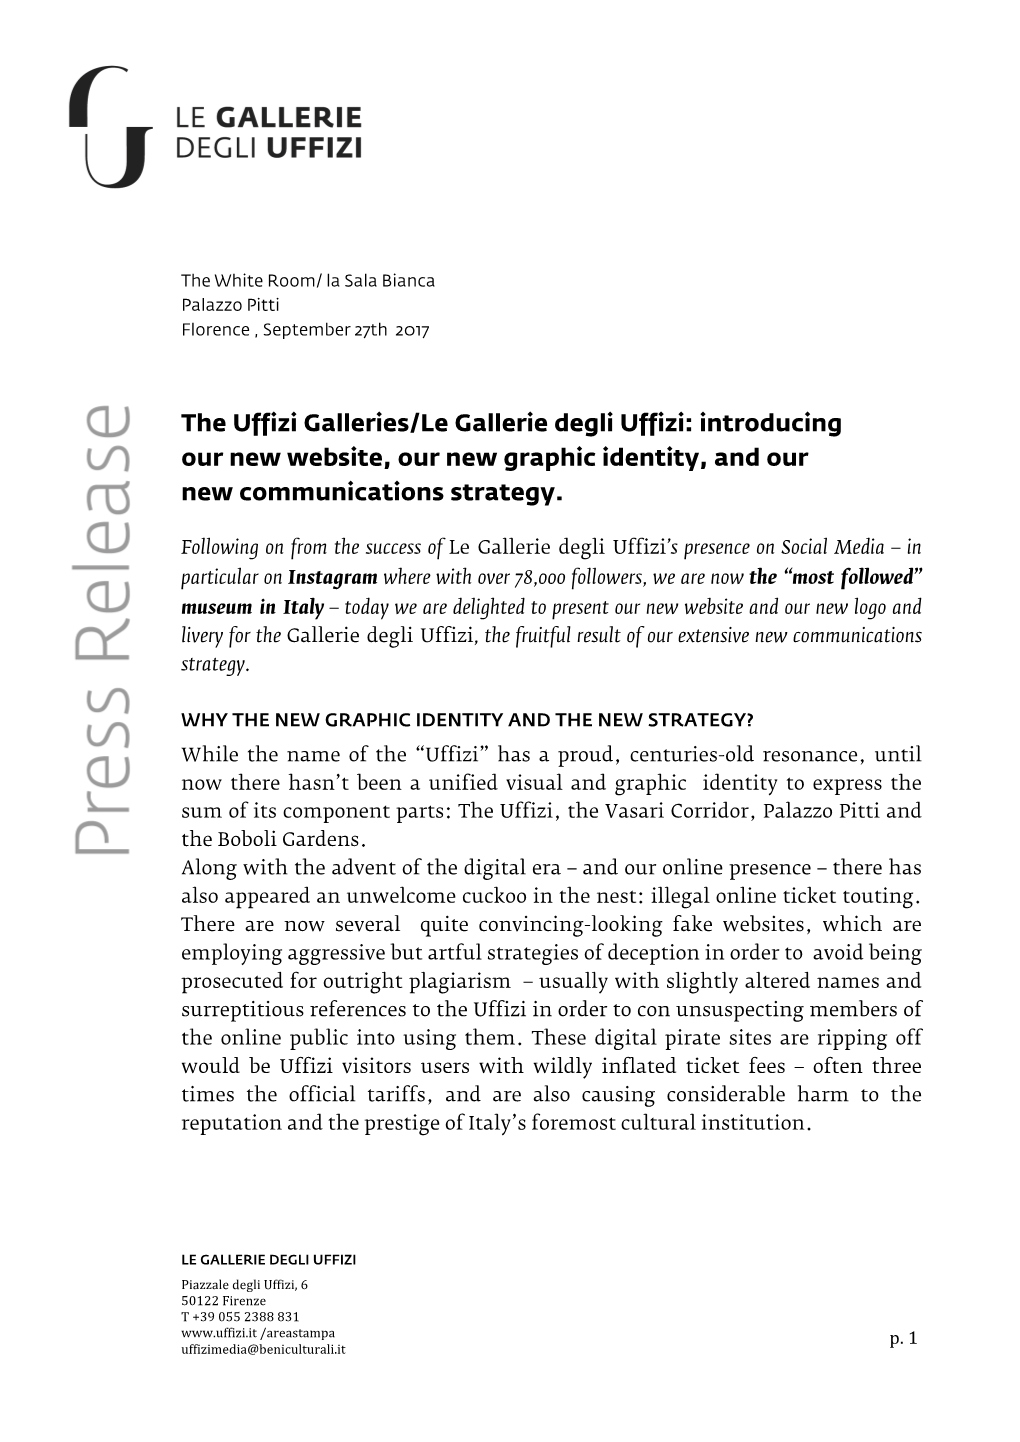 The Uffizi Galleries/Le Gallerie Degli Uffizi: Introducing Our New Website, Our New Graphic Identity, and Our New Communications Strategy